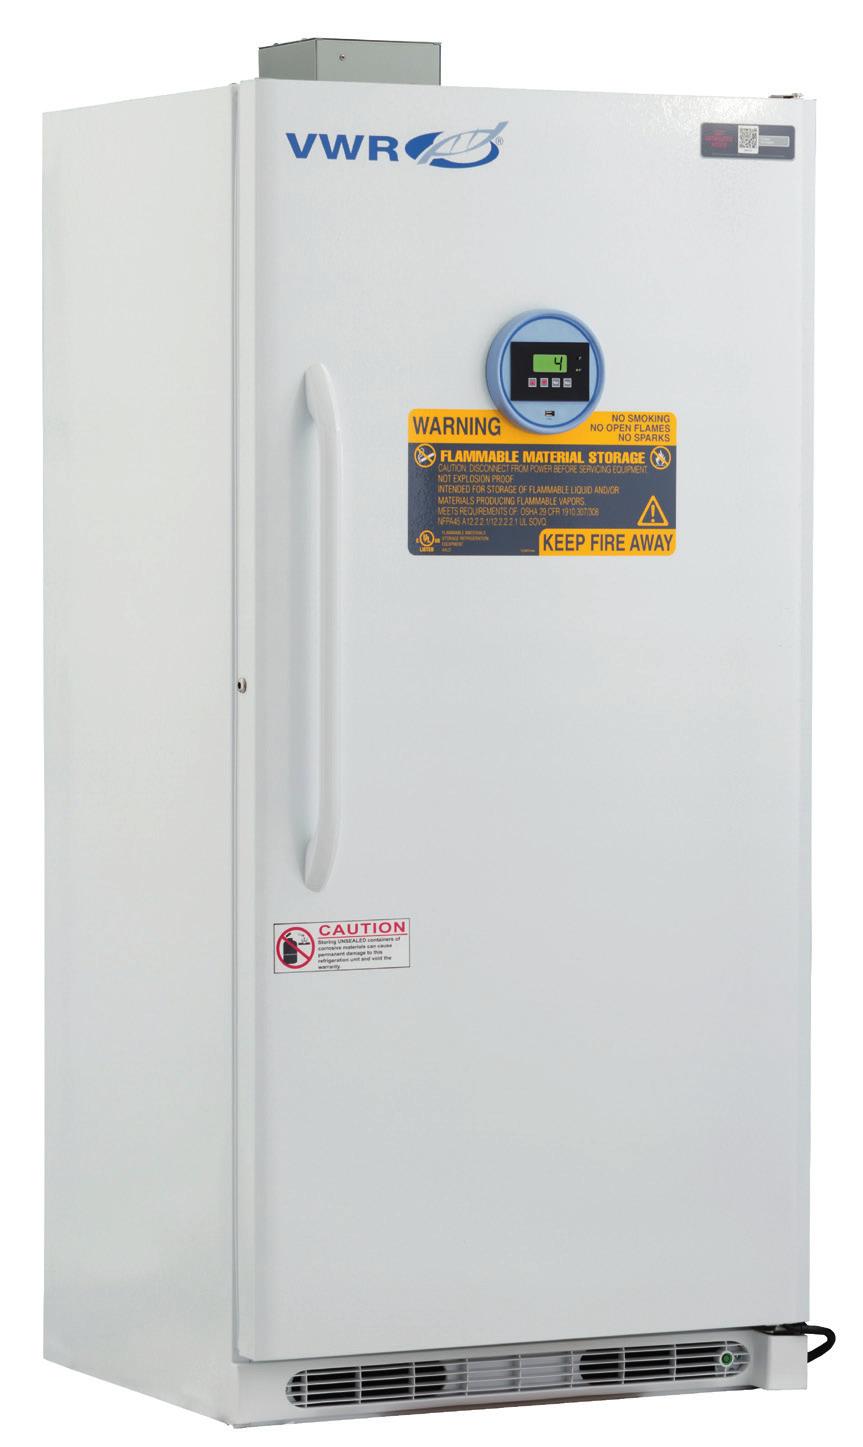 VWR SERIES FLAMMABLE REFRIGERATORS & FREEZERS 1 to 10 C [Refrigerator] -15 to -25 C [Freezer] No internal electrical components inside of unit Electrical compressor components sealed in vapor-proof